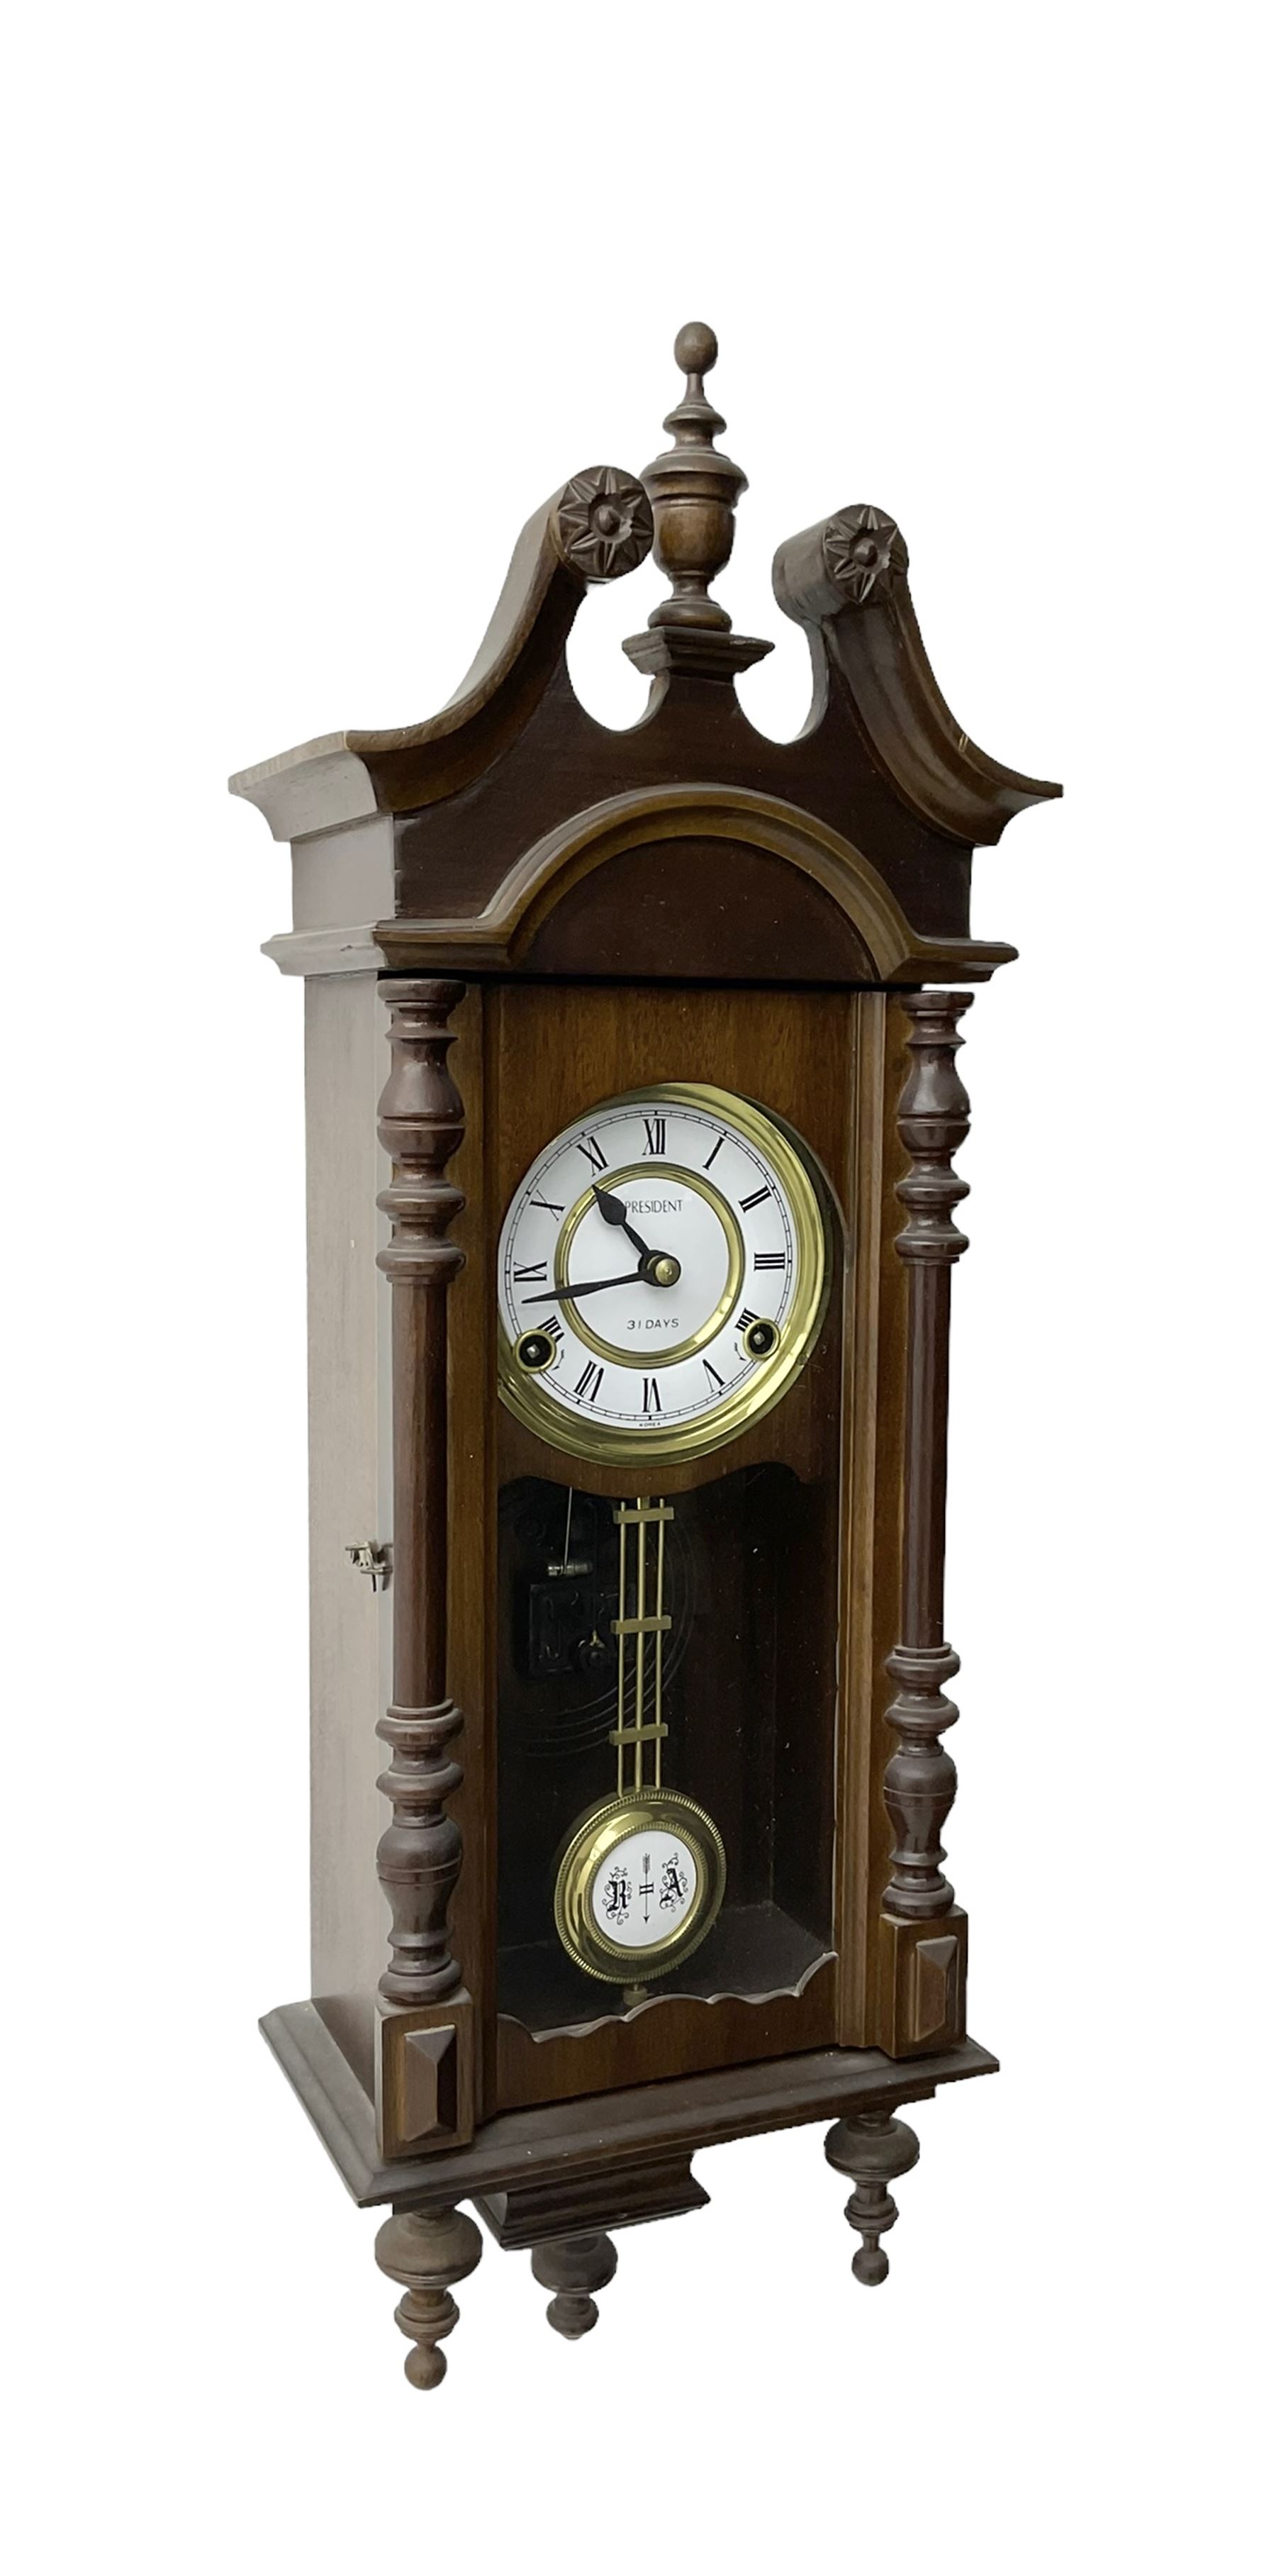 Continental - 31day spring driven wall clock in a mahogany case - Image 3 of 4